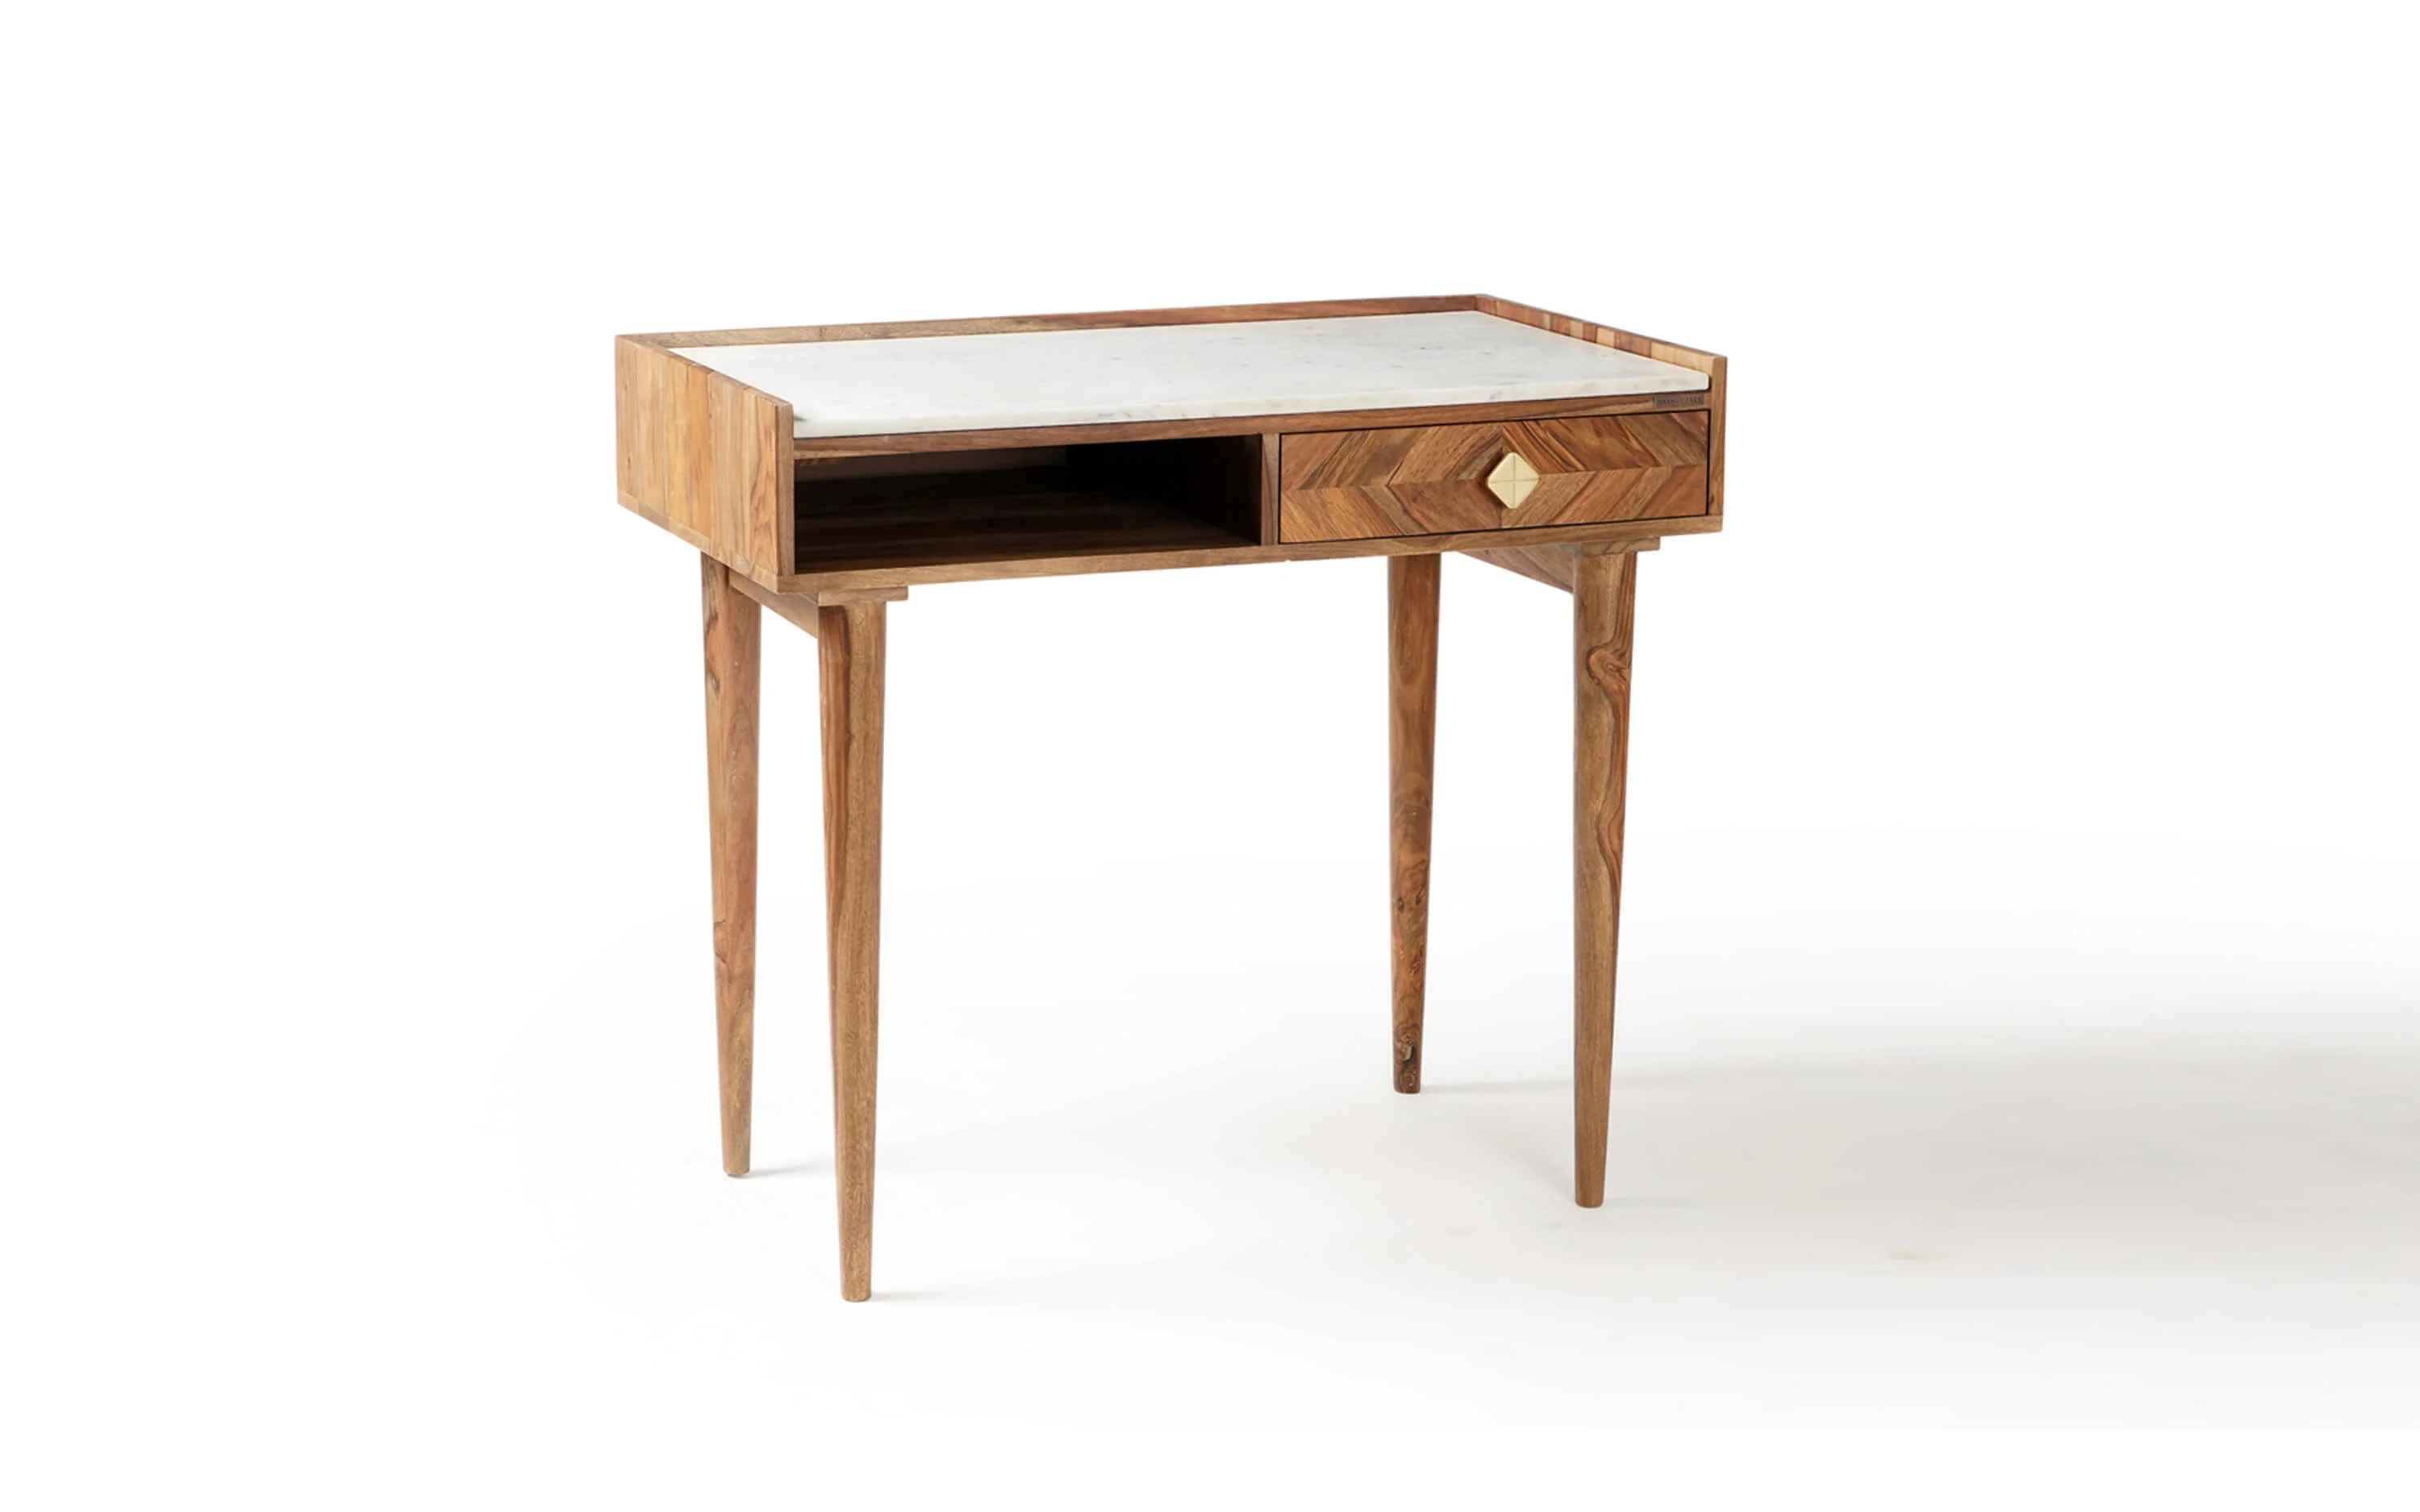 Dado Study Table With Chair